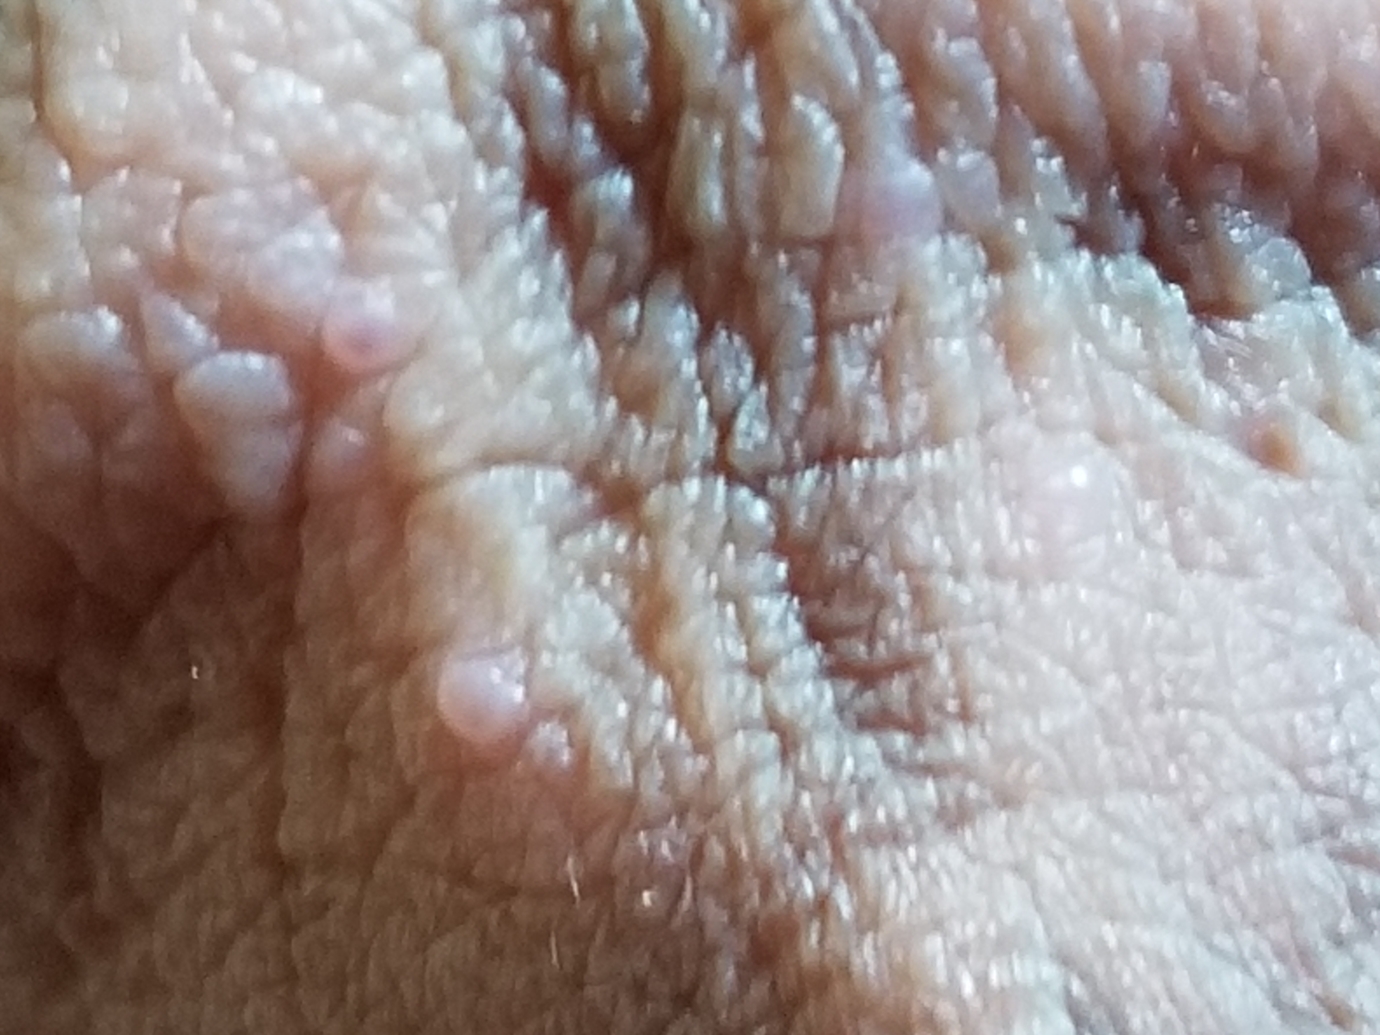 Penile papules tiny PPP: Pearly